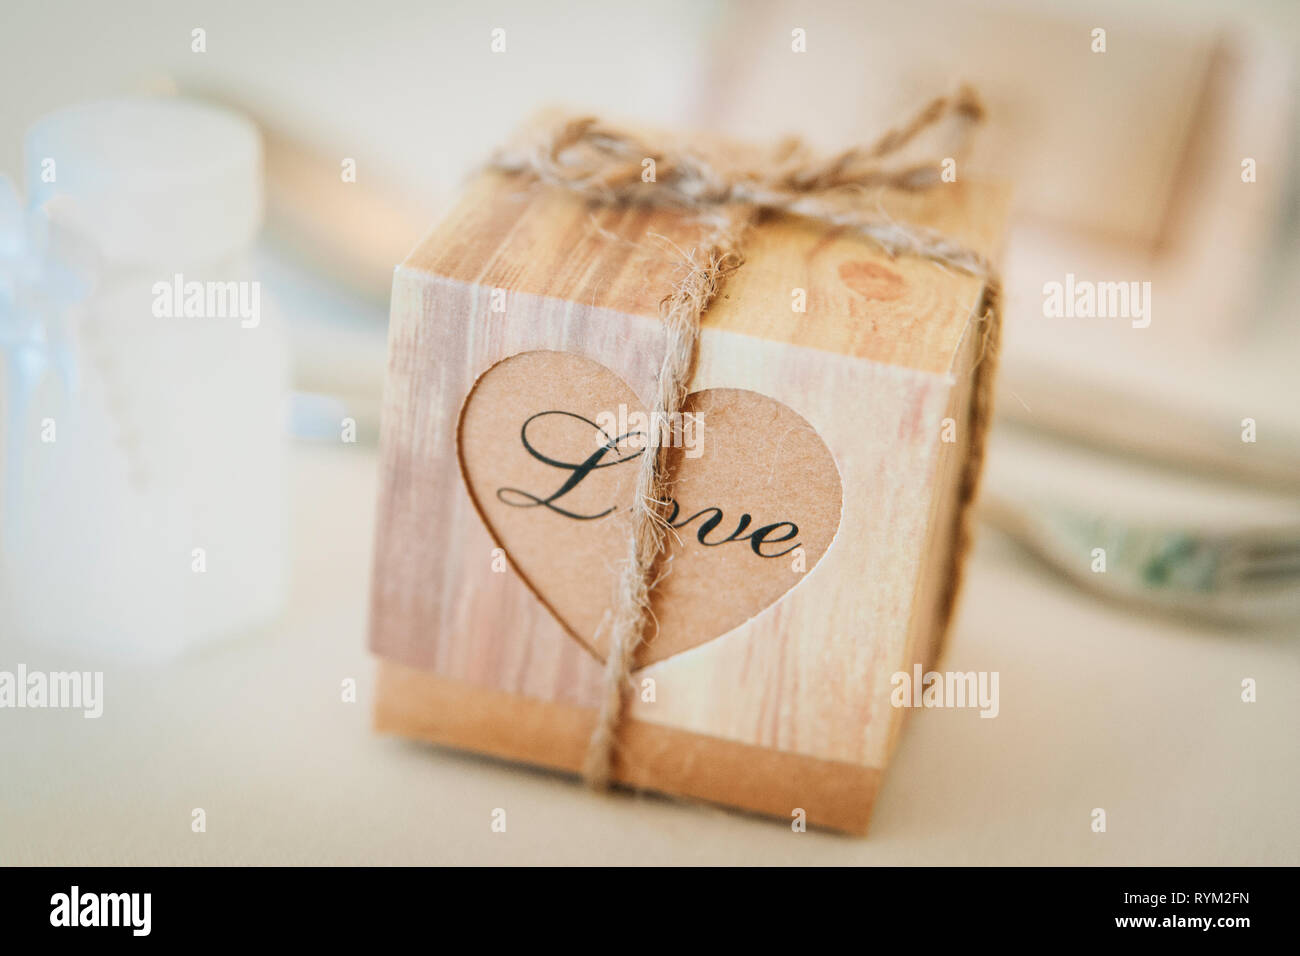 small rustic wedding favour box with Love written on tied with string Stock Photo